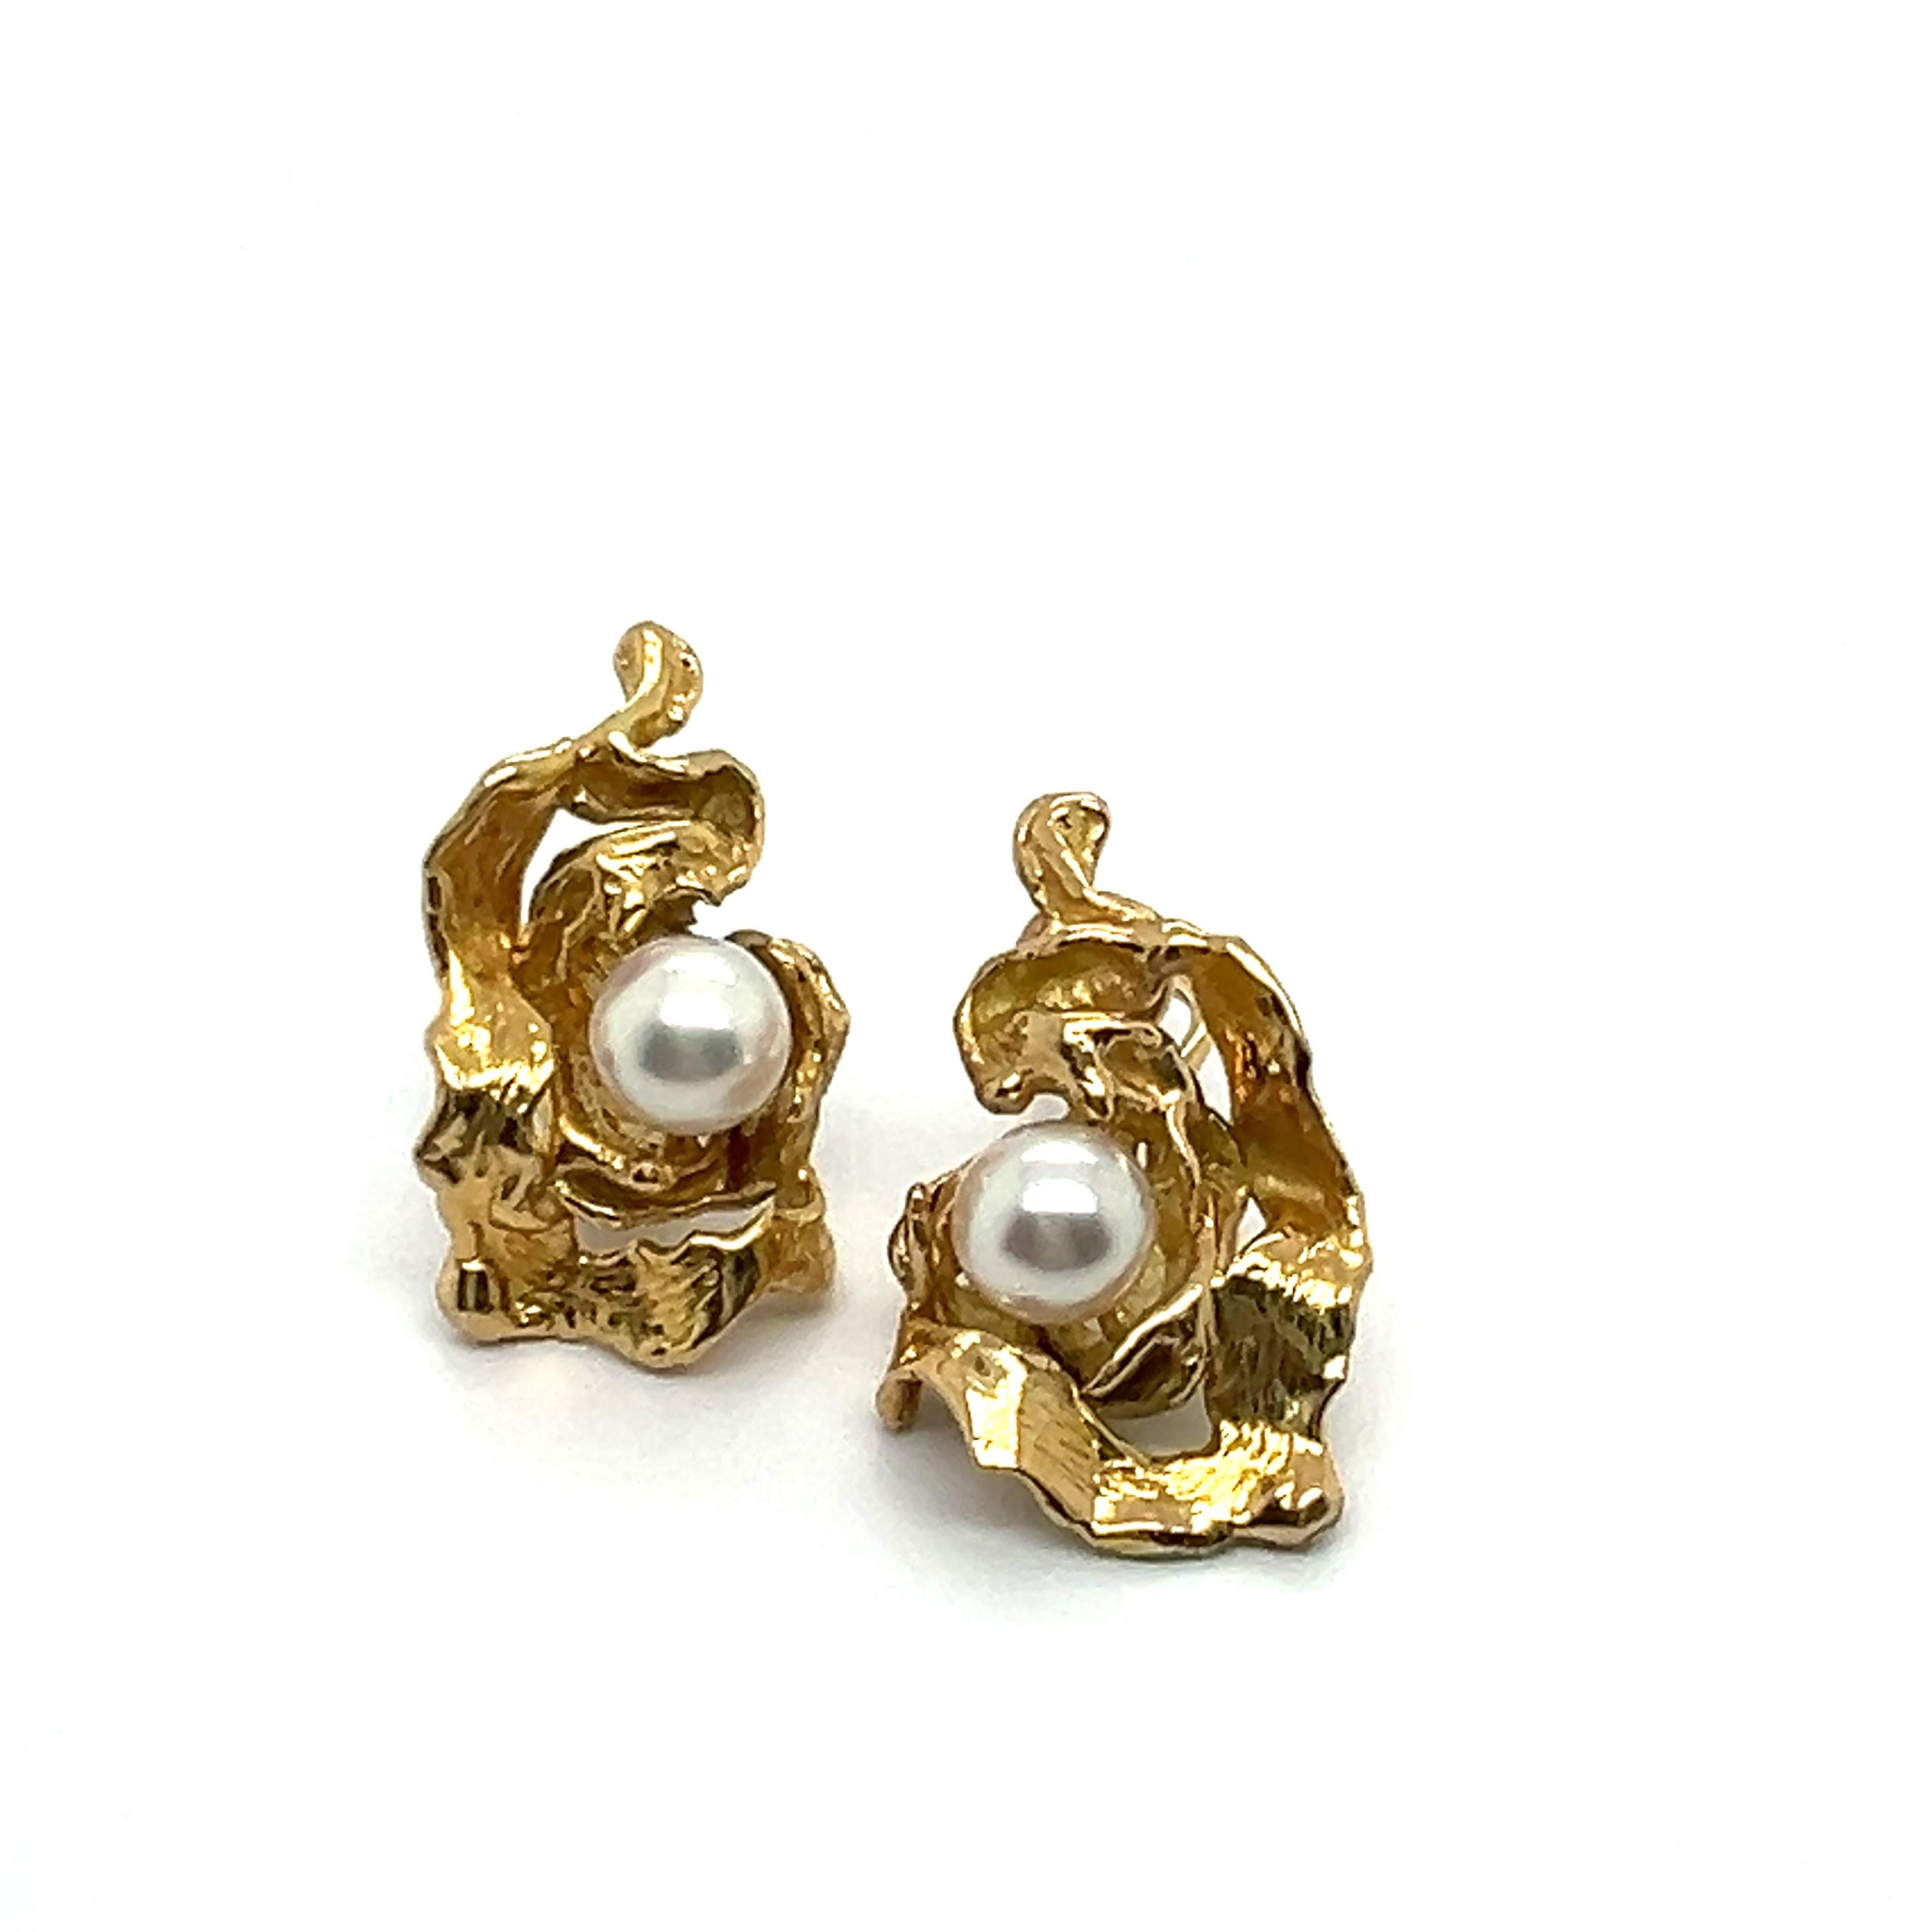 Sculptural Earrings with Akoya Pearls in 18 Karat Yellow Gold by Gilbert Albert For Sale 4